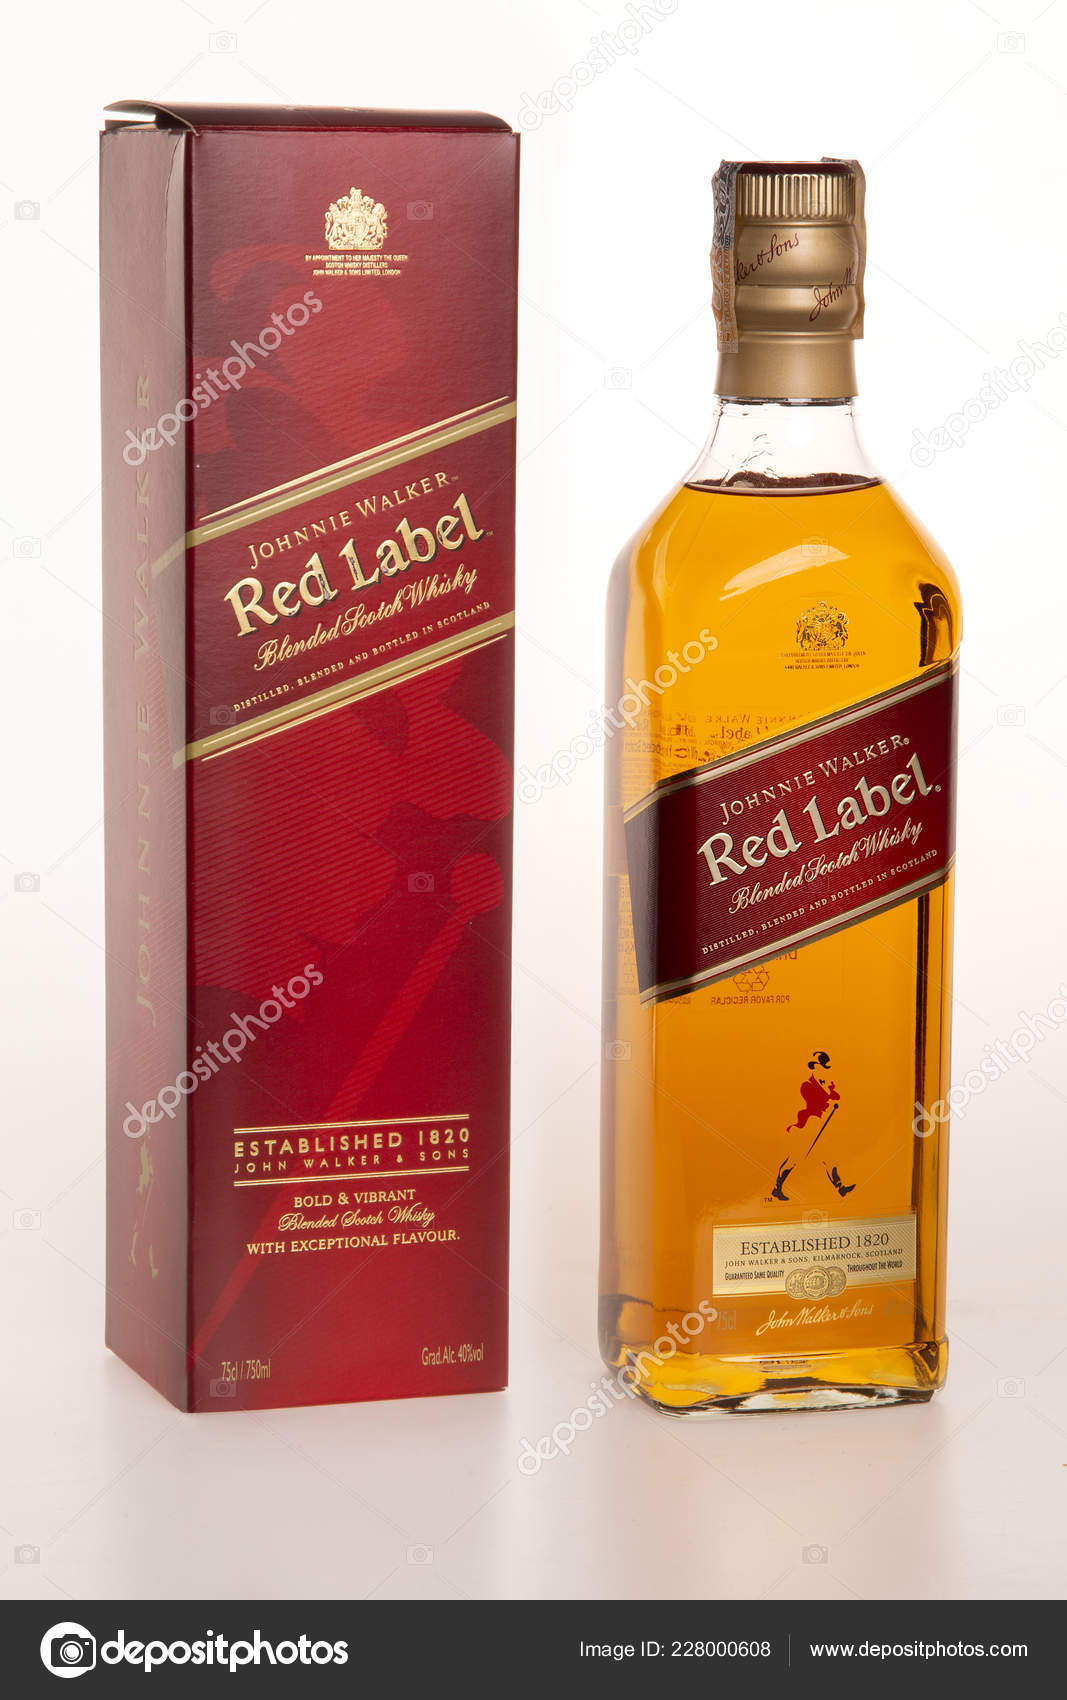 Johnnie Walker Red Label Whisky Trio Pack - Bold Flavour